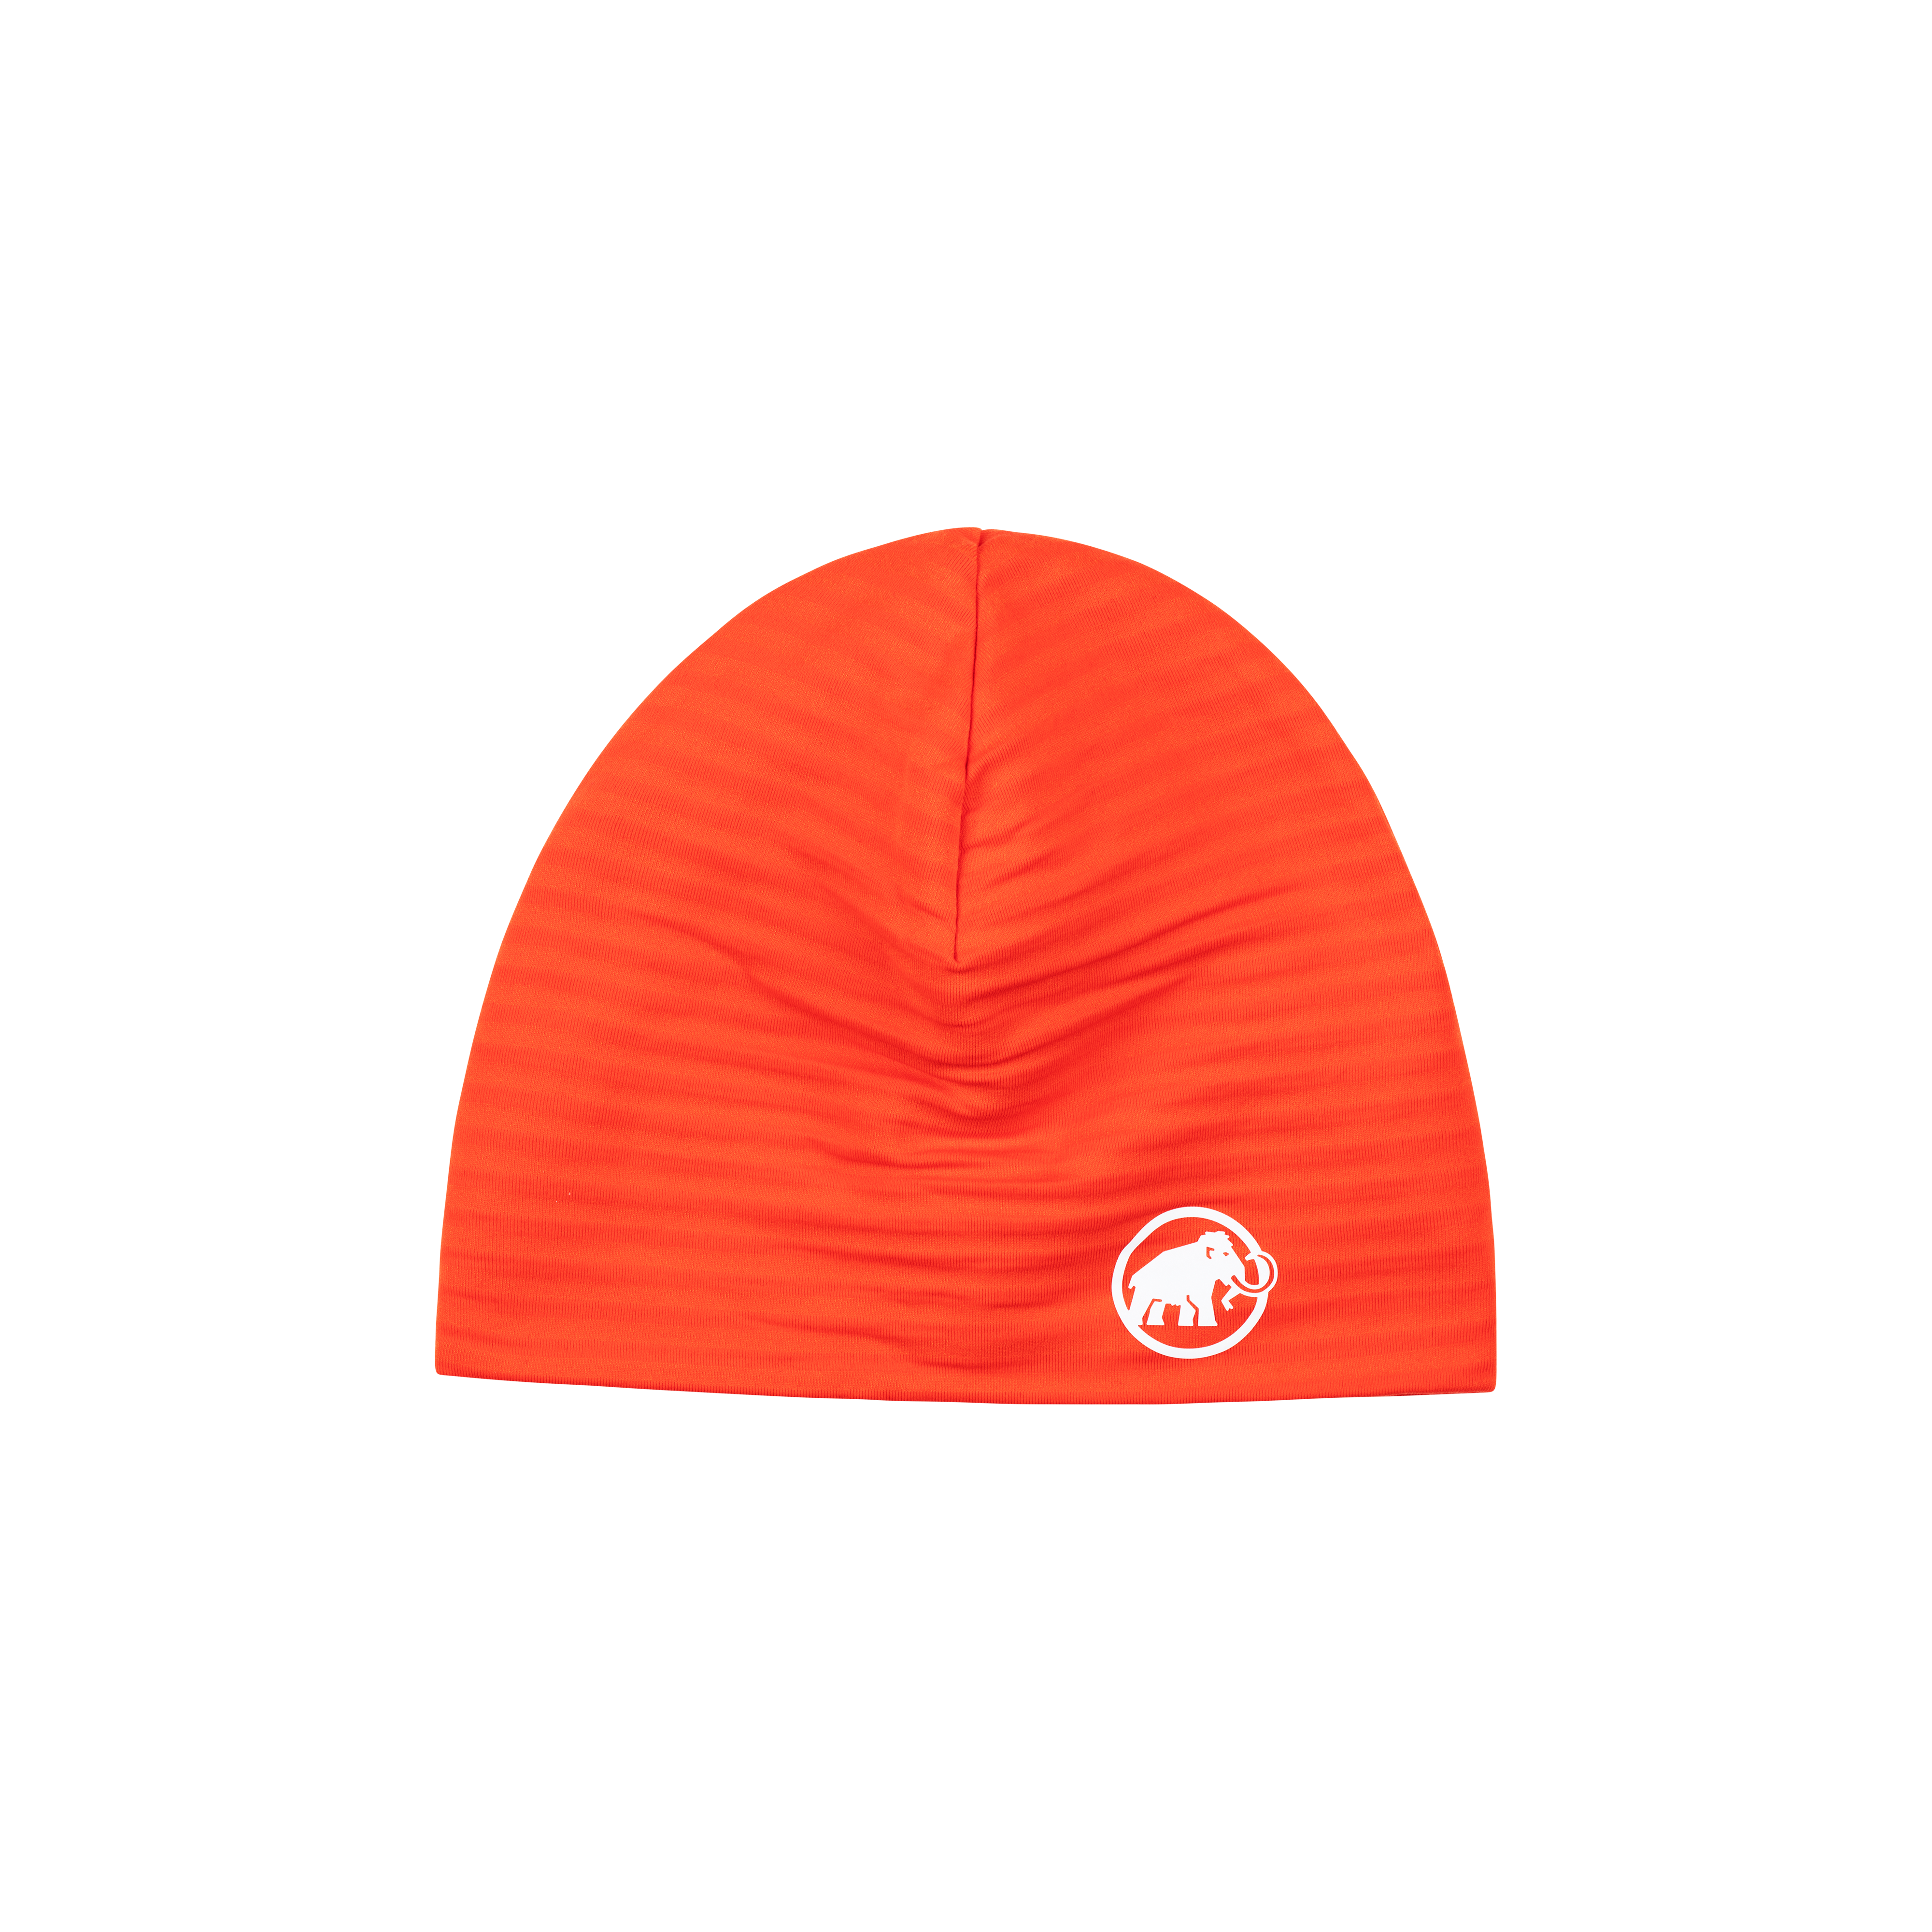 Taiss Light Beanie - hot red, one size thumbnail